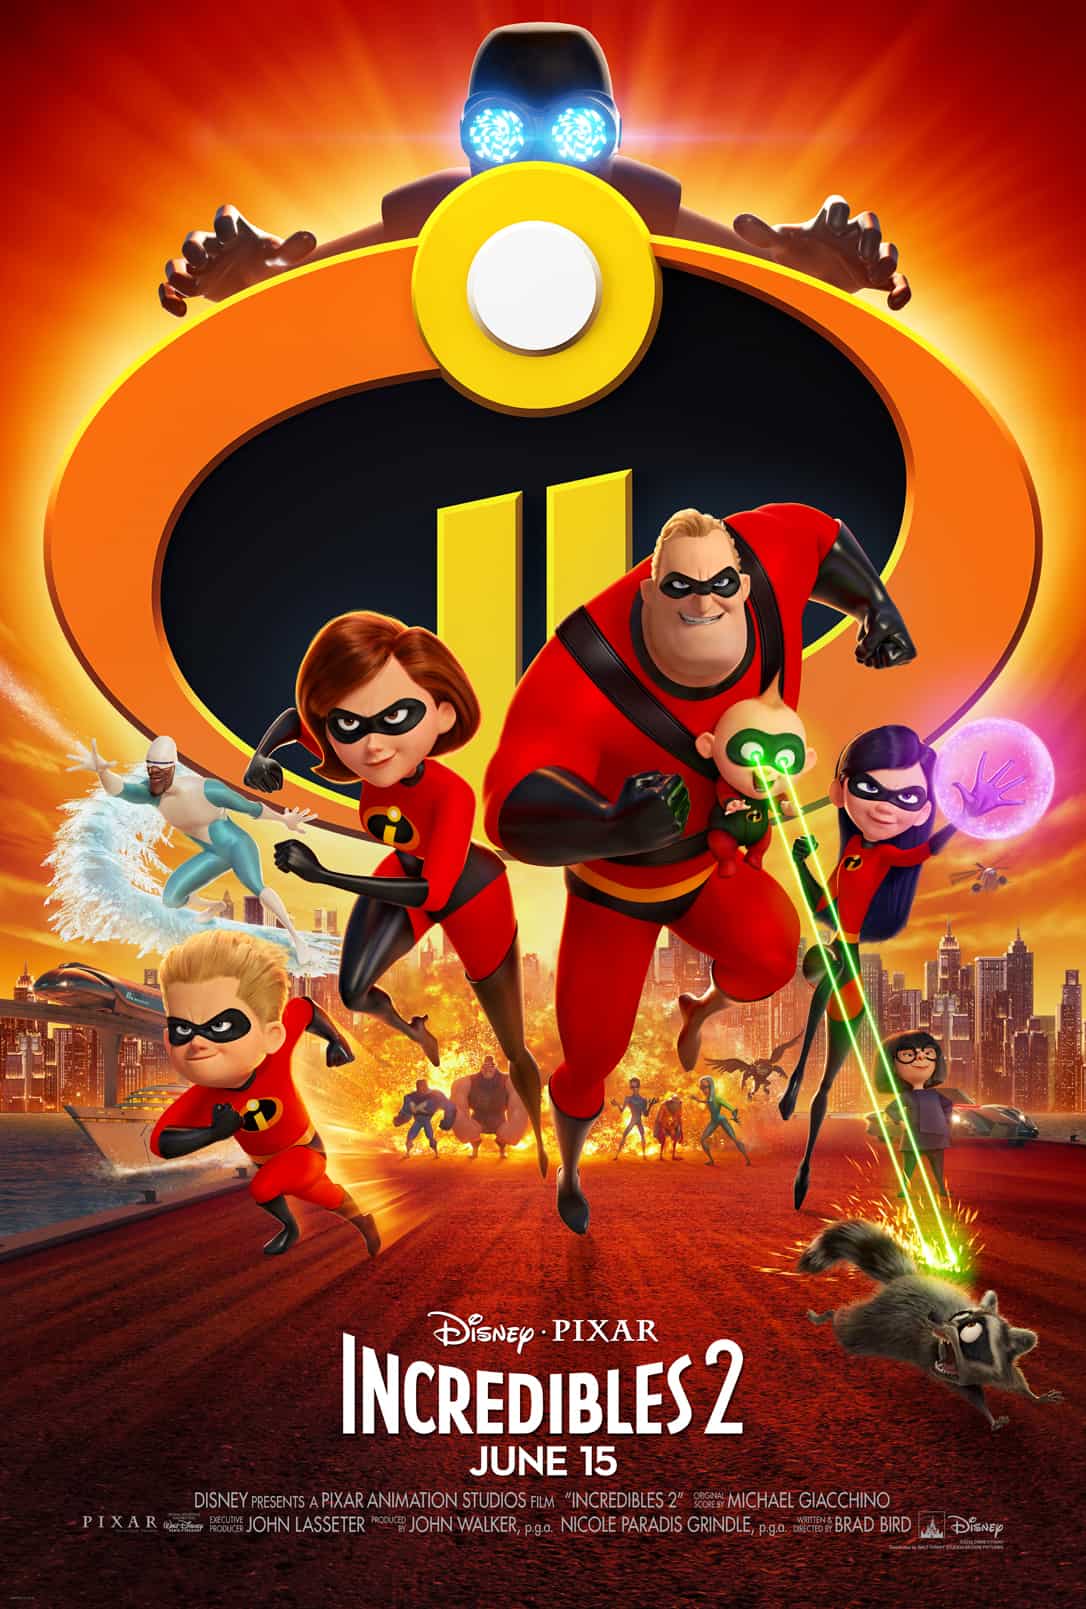 Movie-poster-Incredibles-2-review